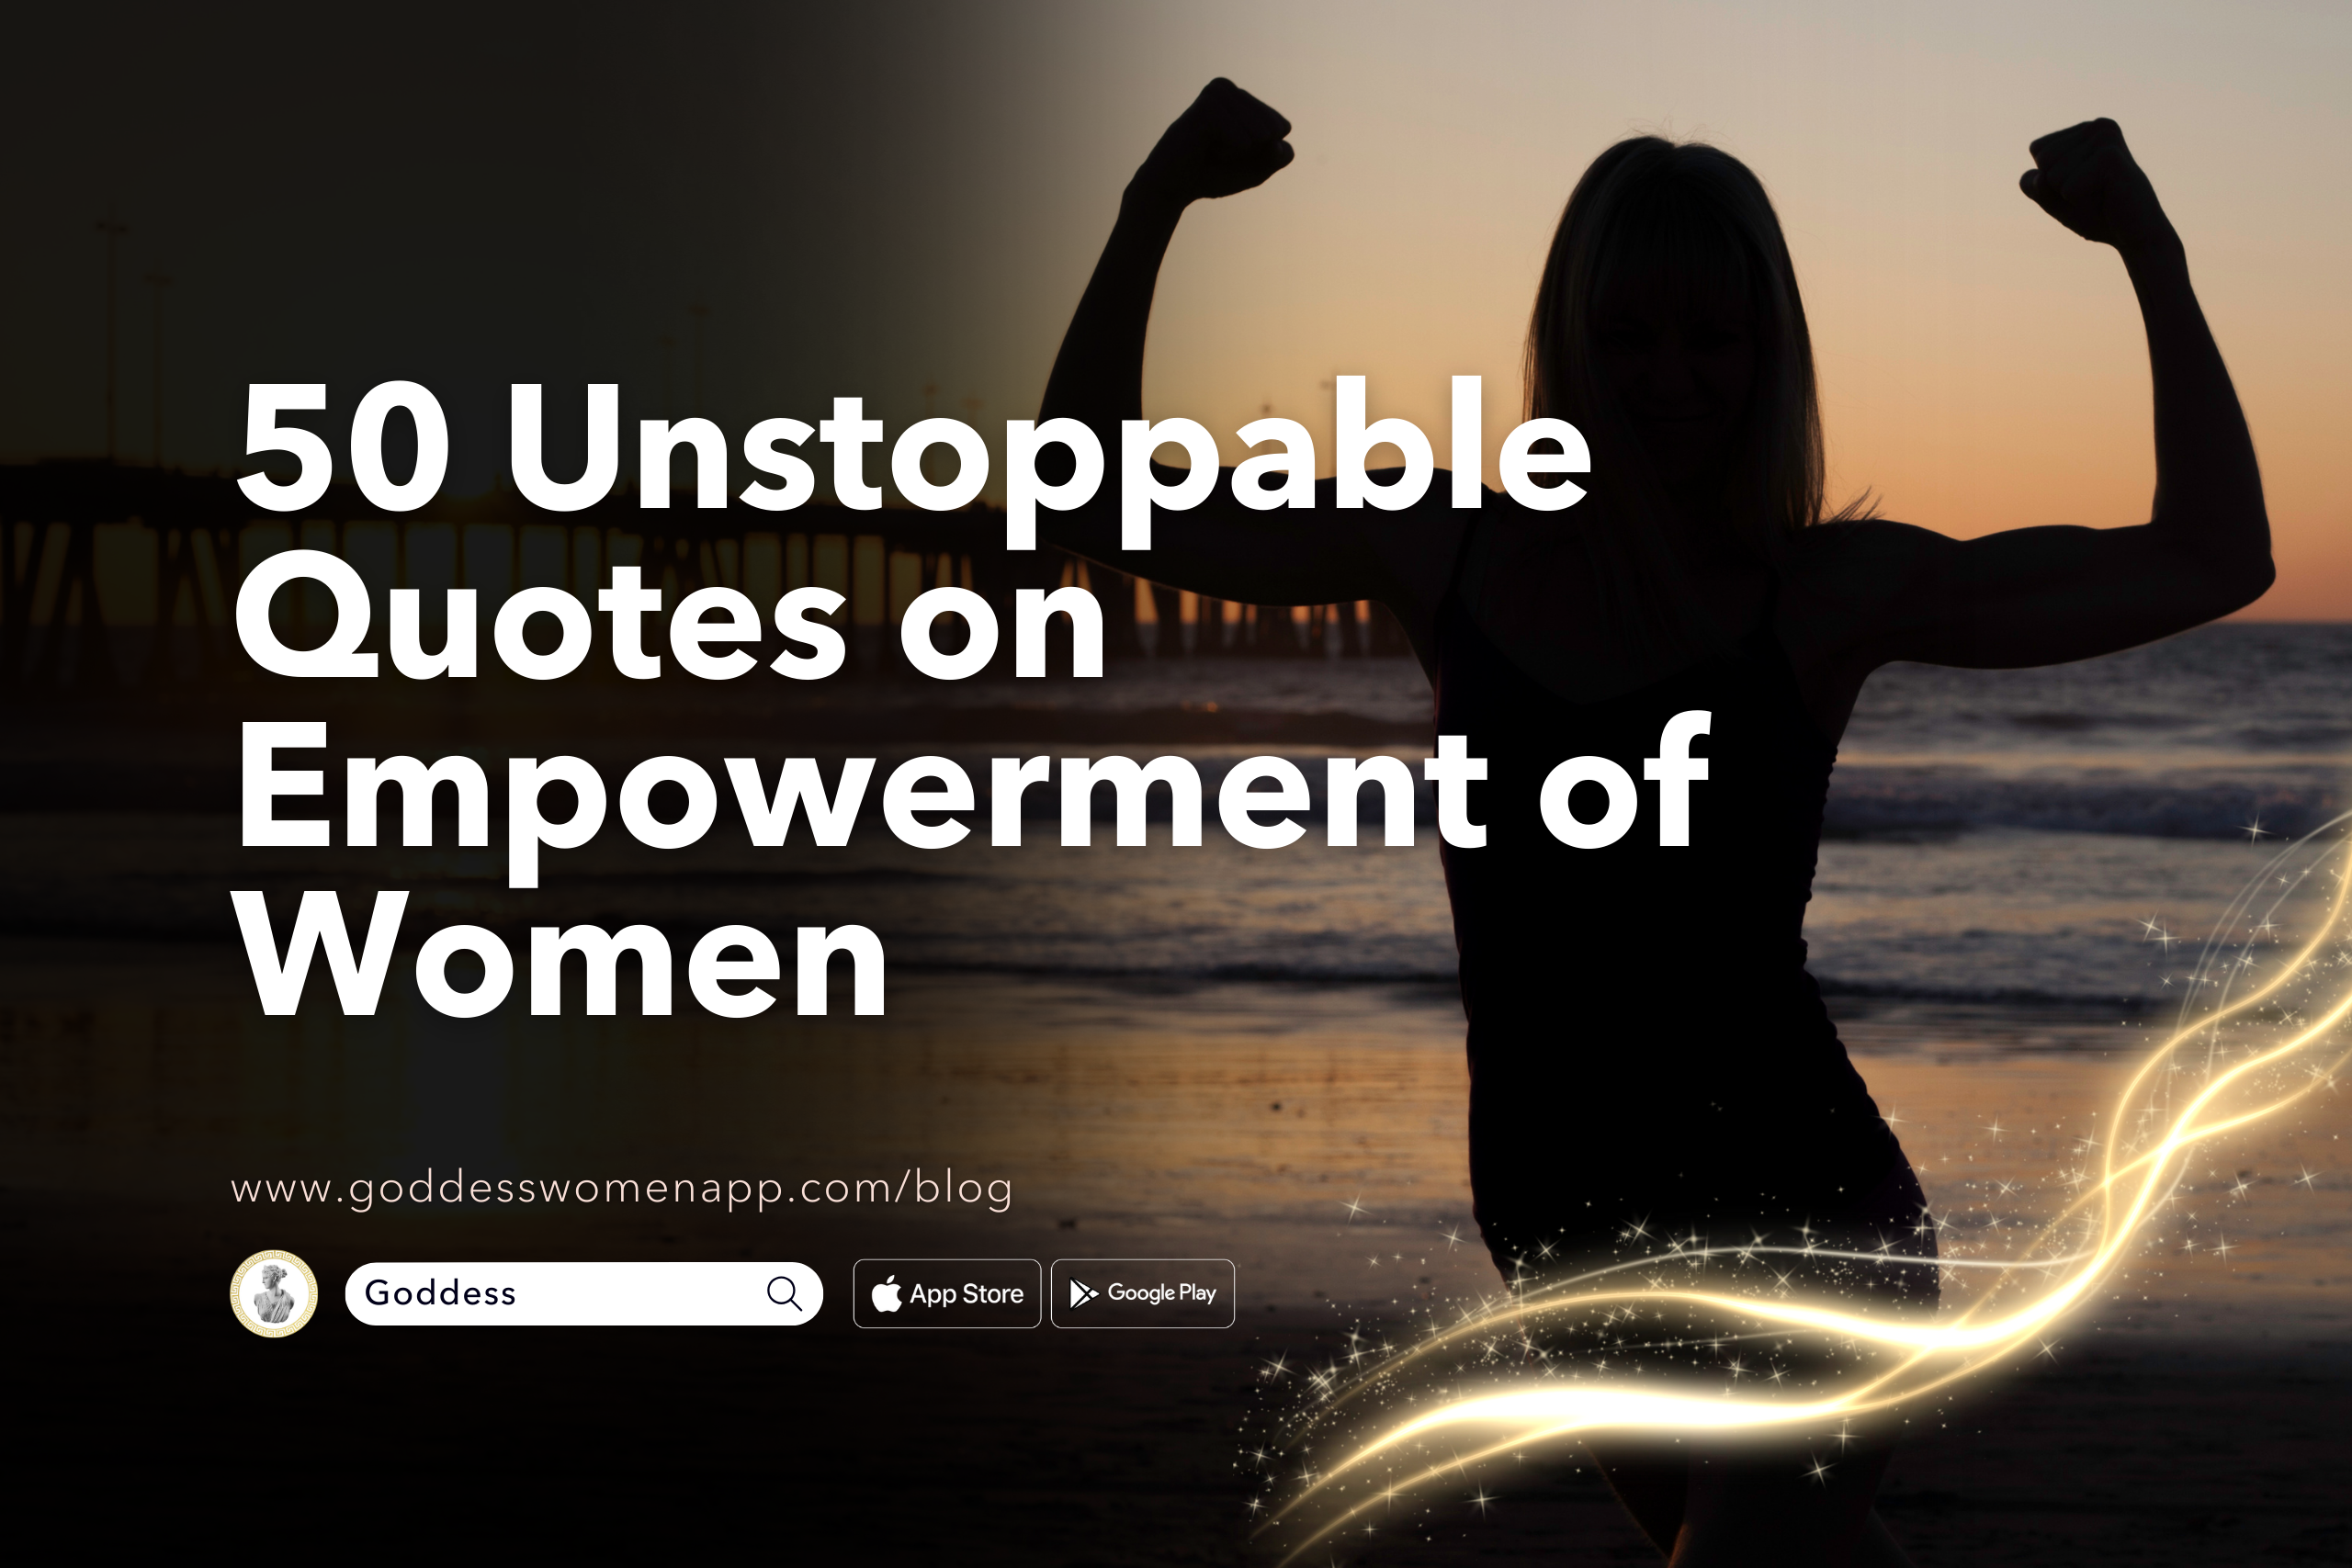 50 Unstoppable Quotes on Empowerment of Women - Goddess